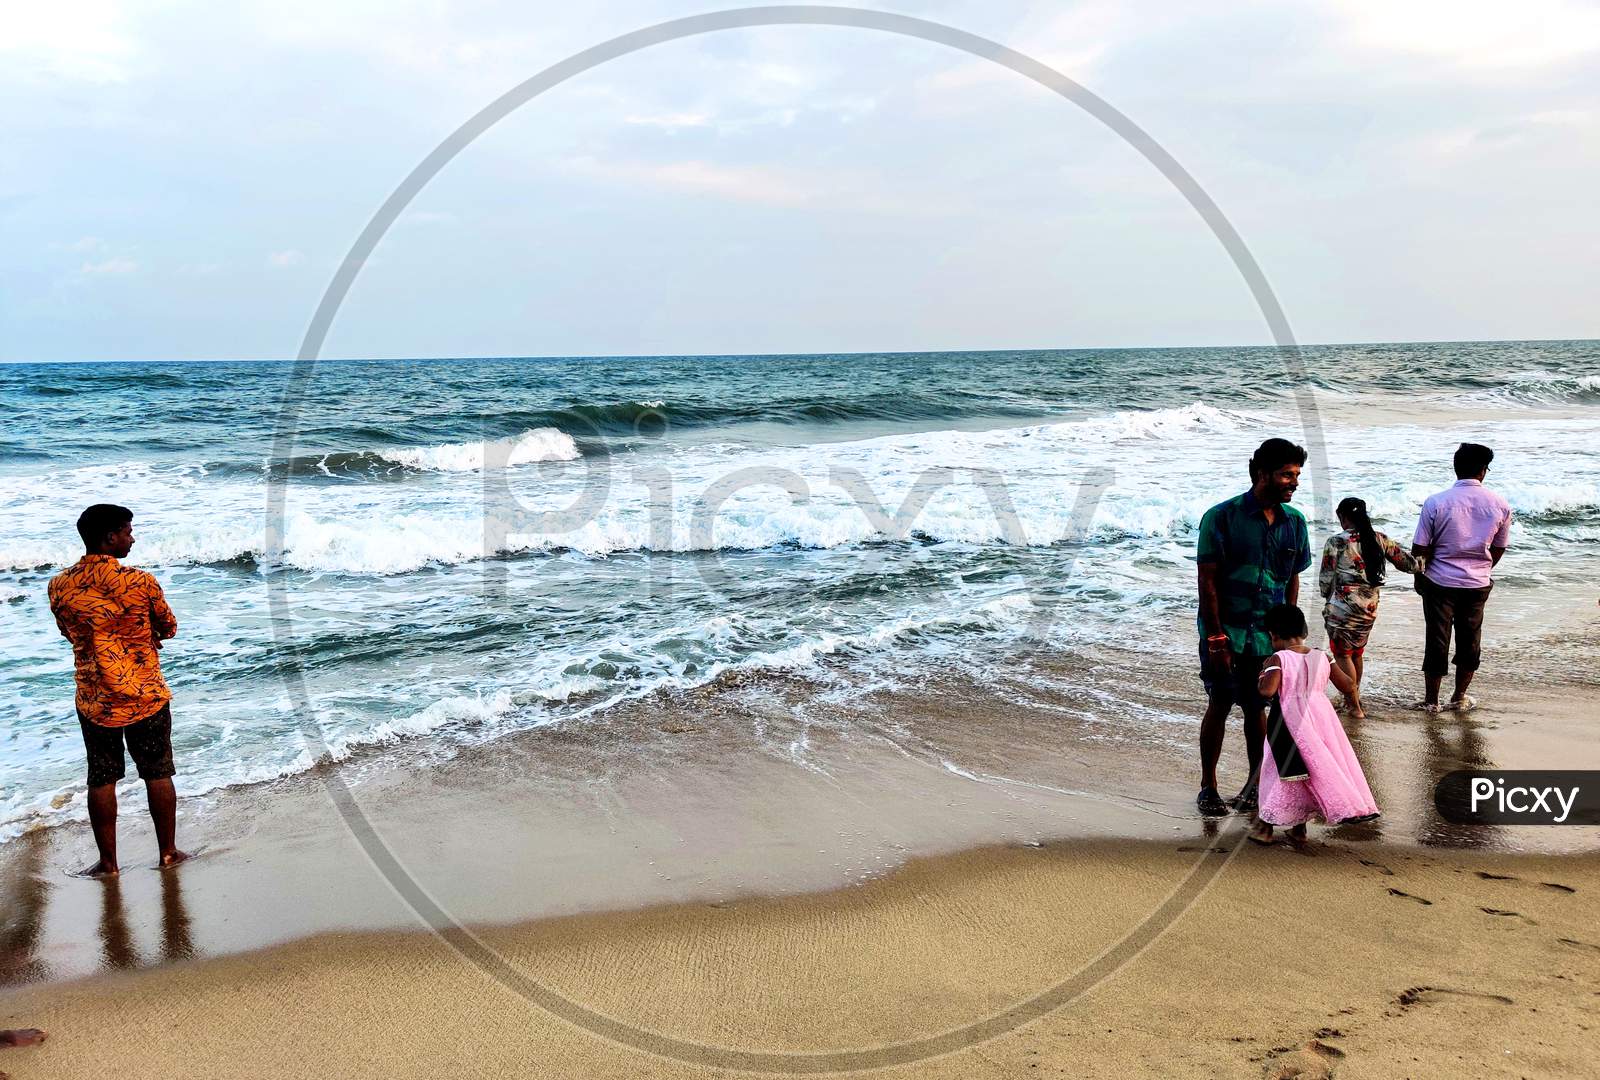 Some People Enjoying The Waves Of The Sea In Chennai